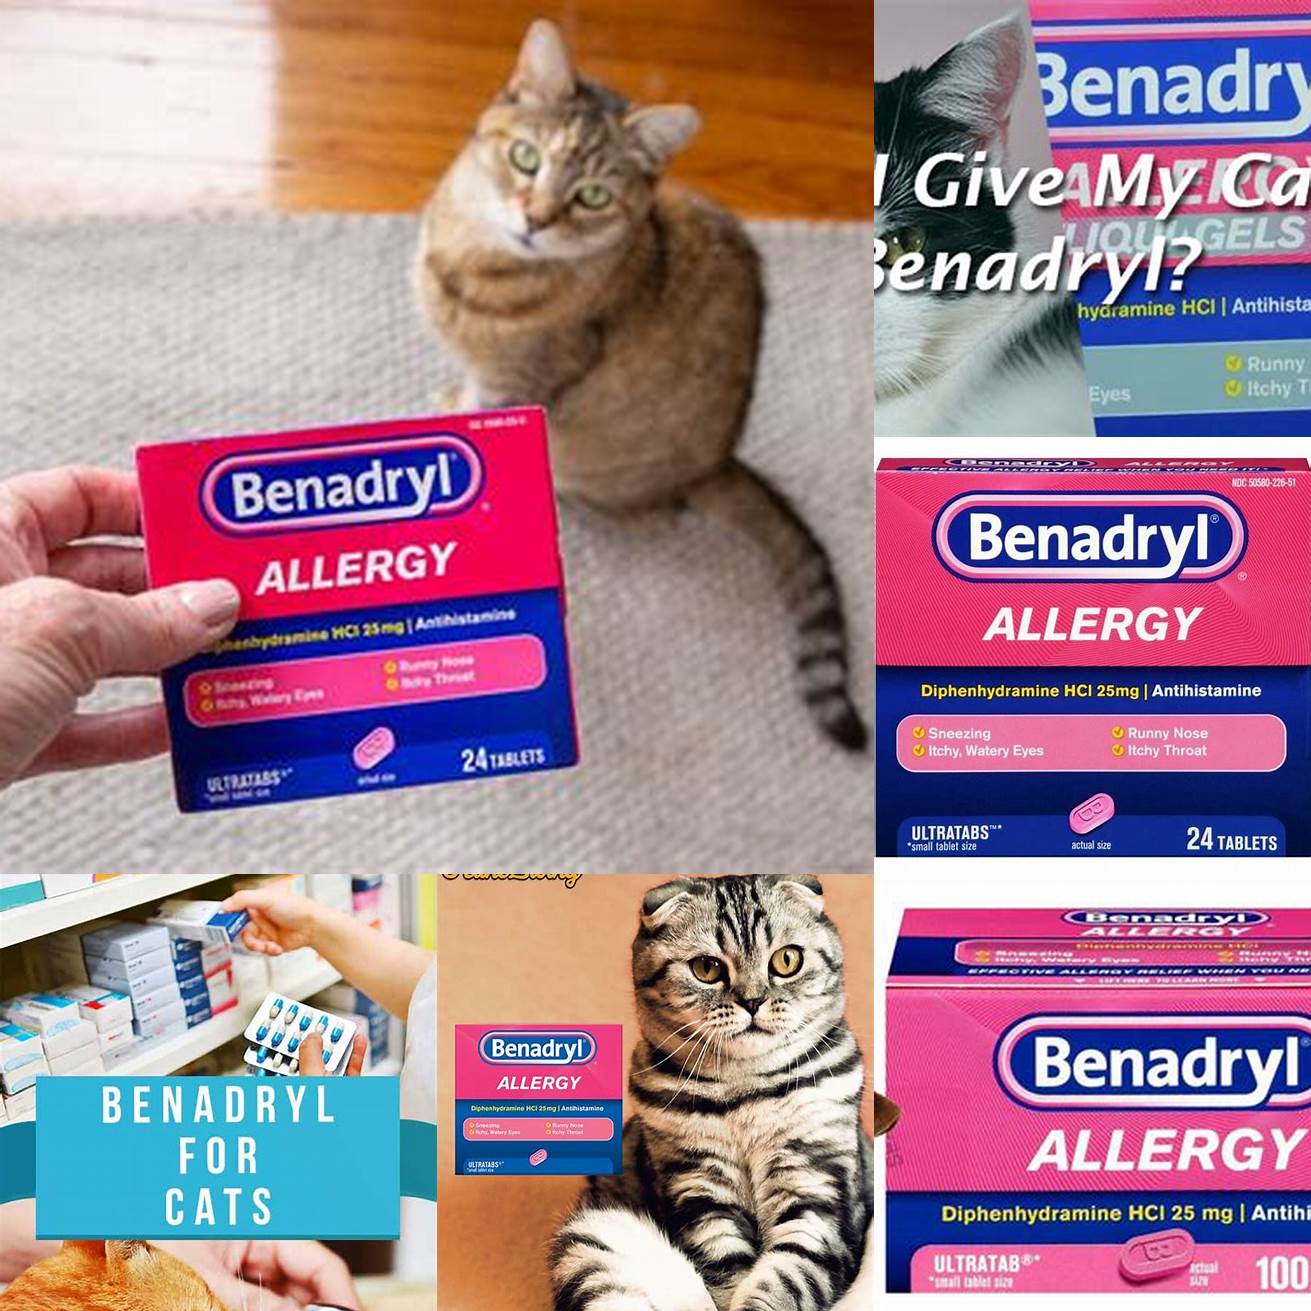 Q Can I use over-the-counter Benadryl for my cat